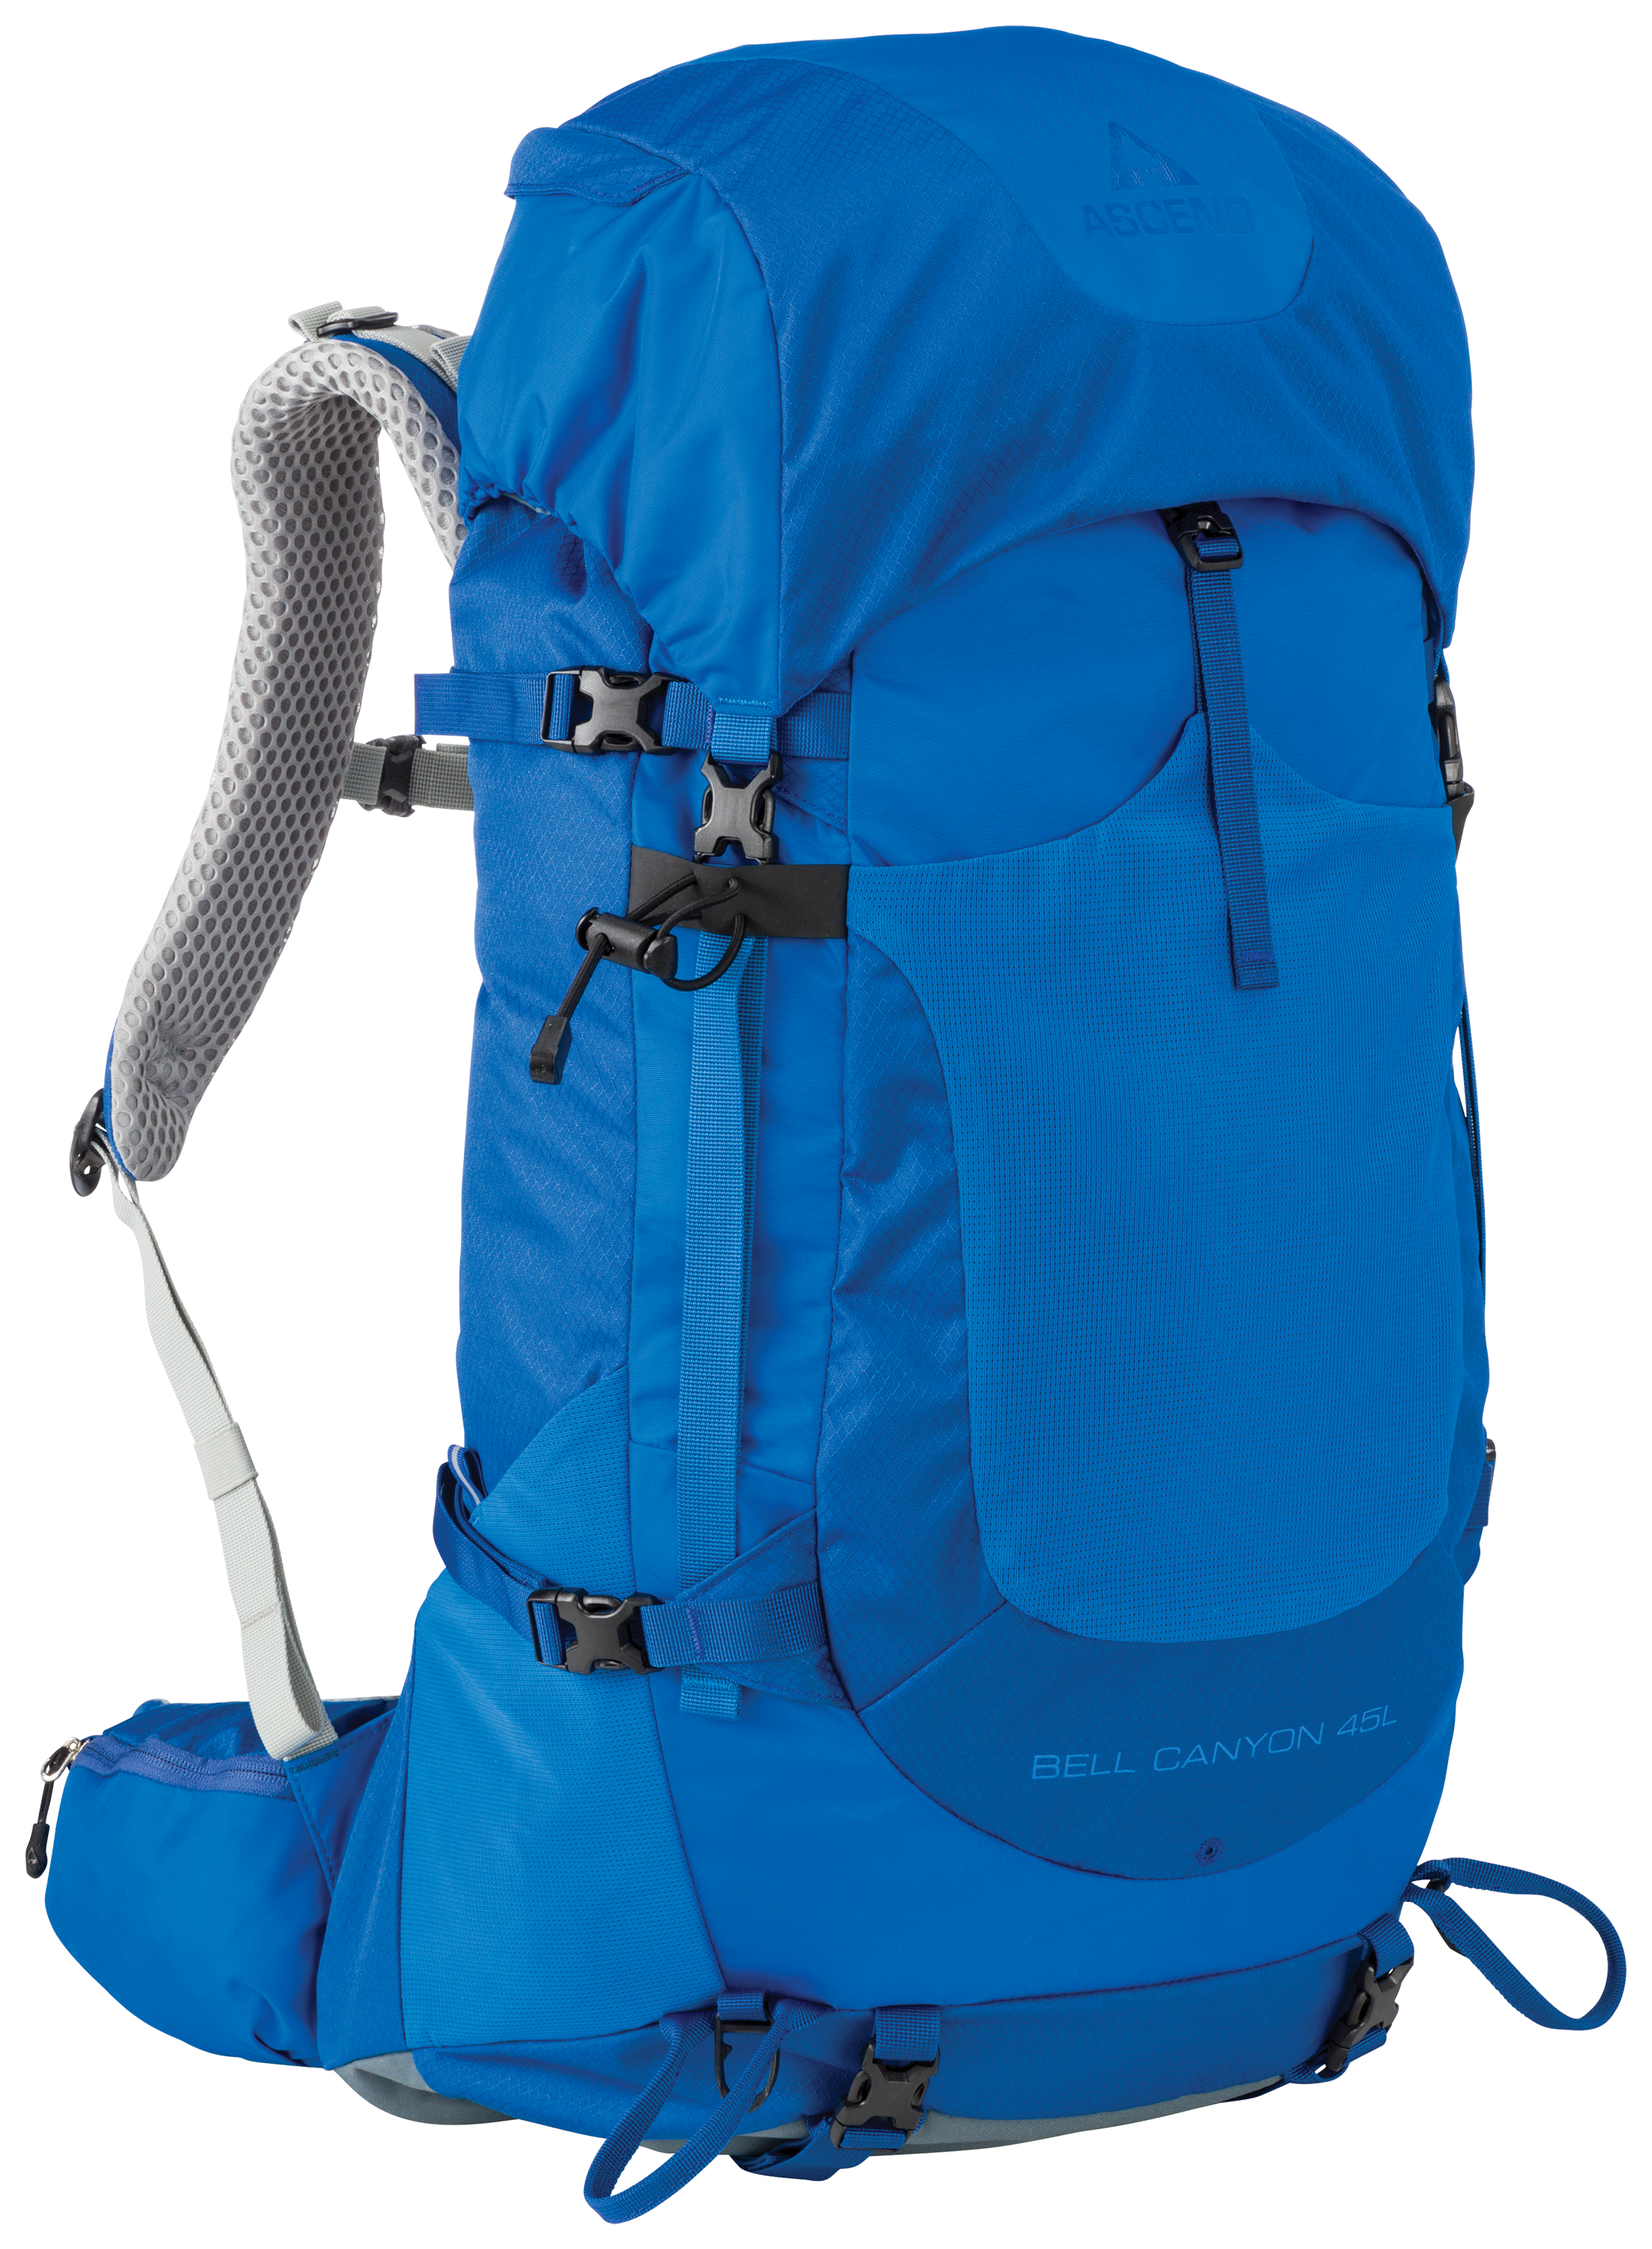 Bass Pro Shop Hiking Backpack Sale Discounted